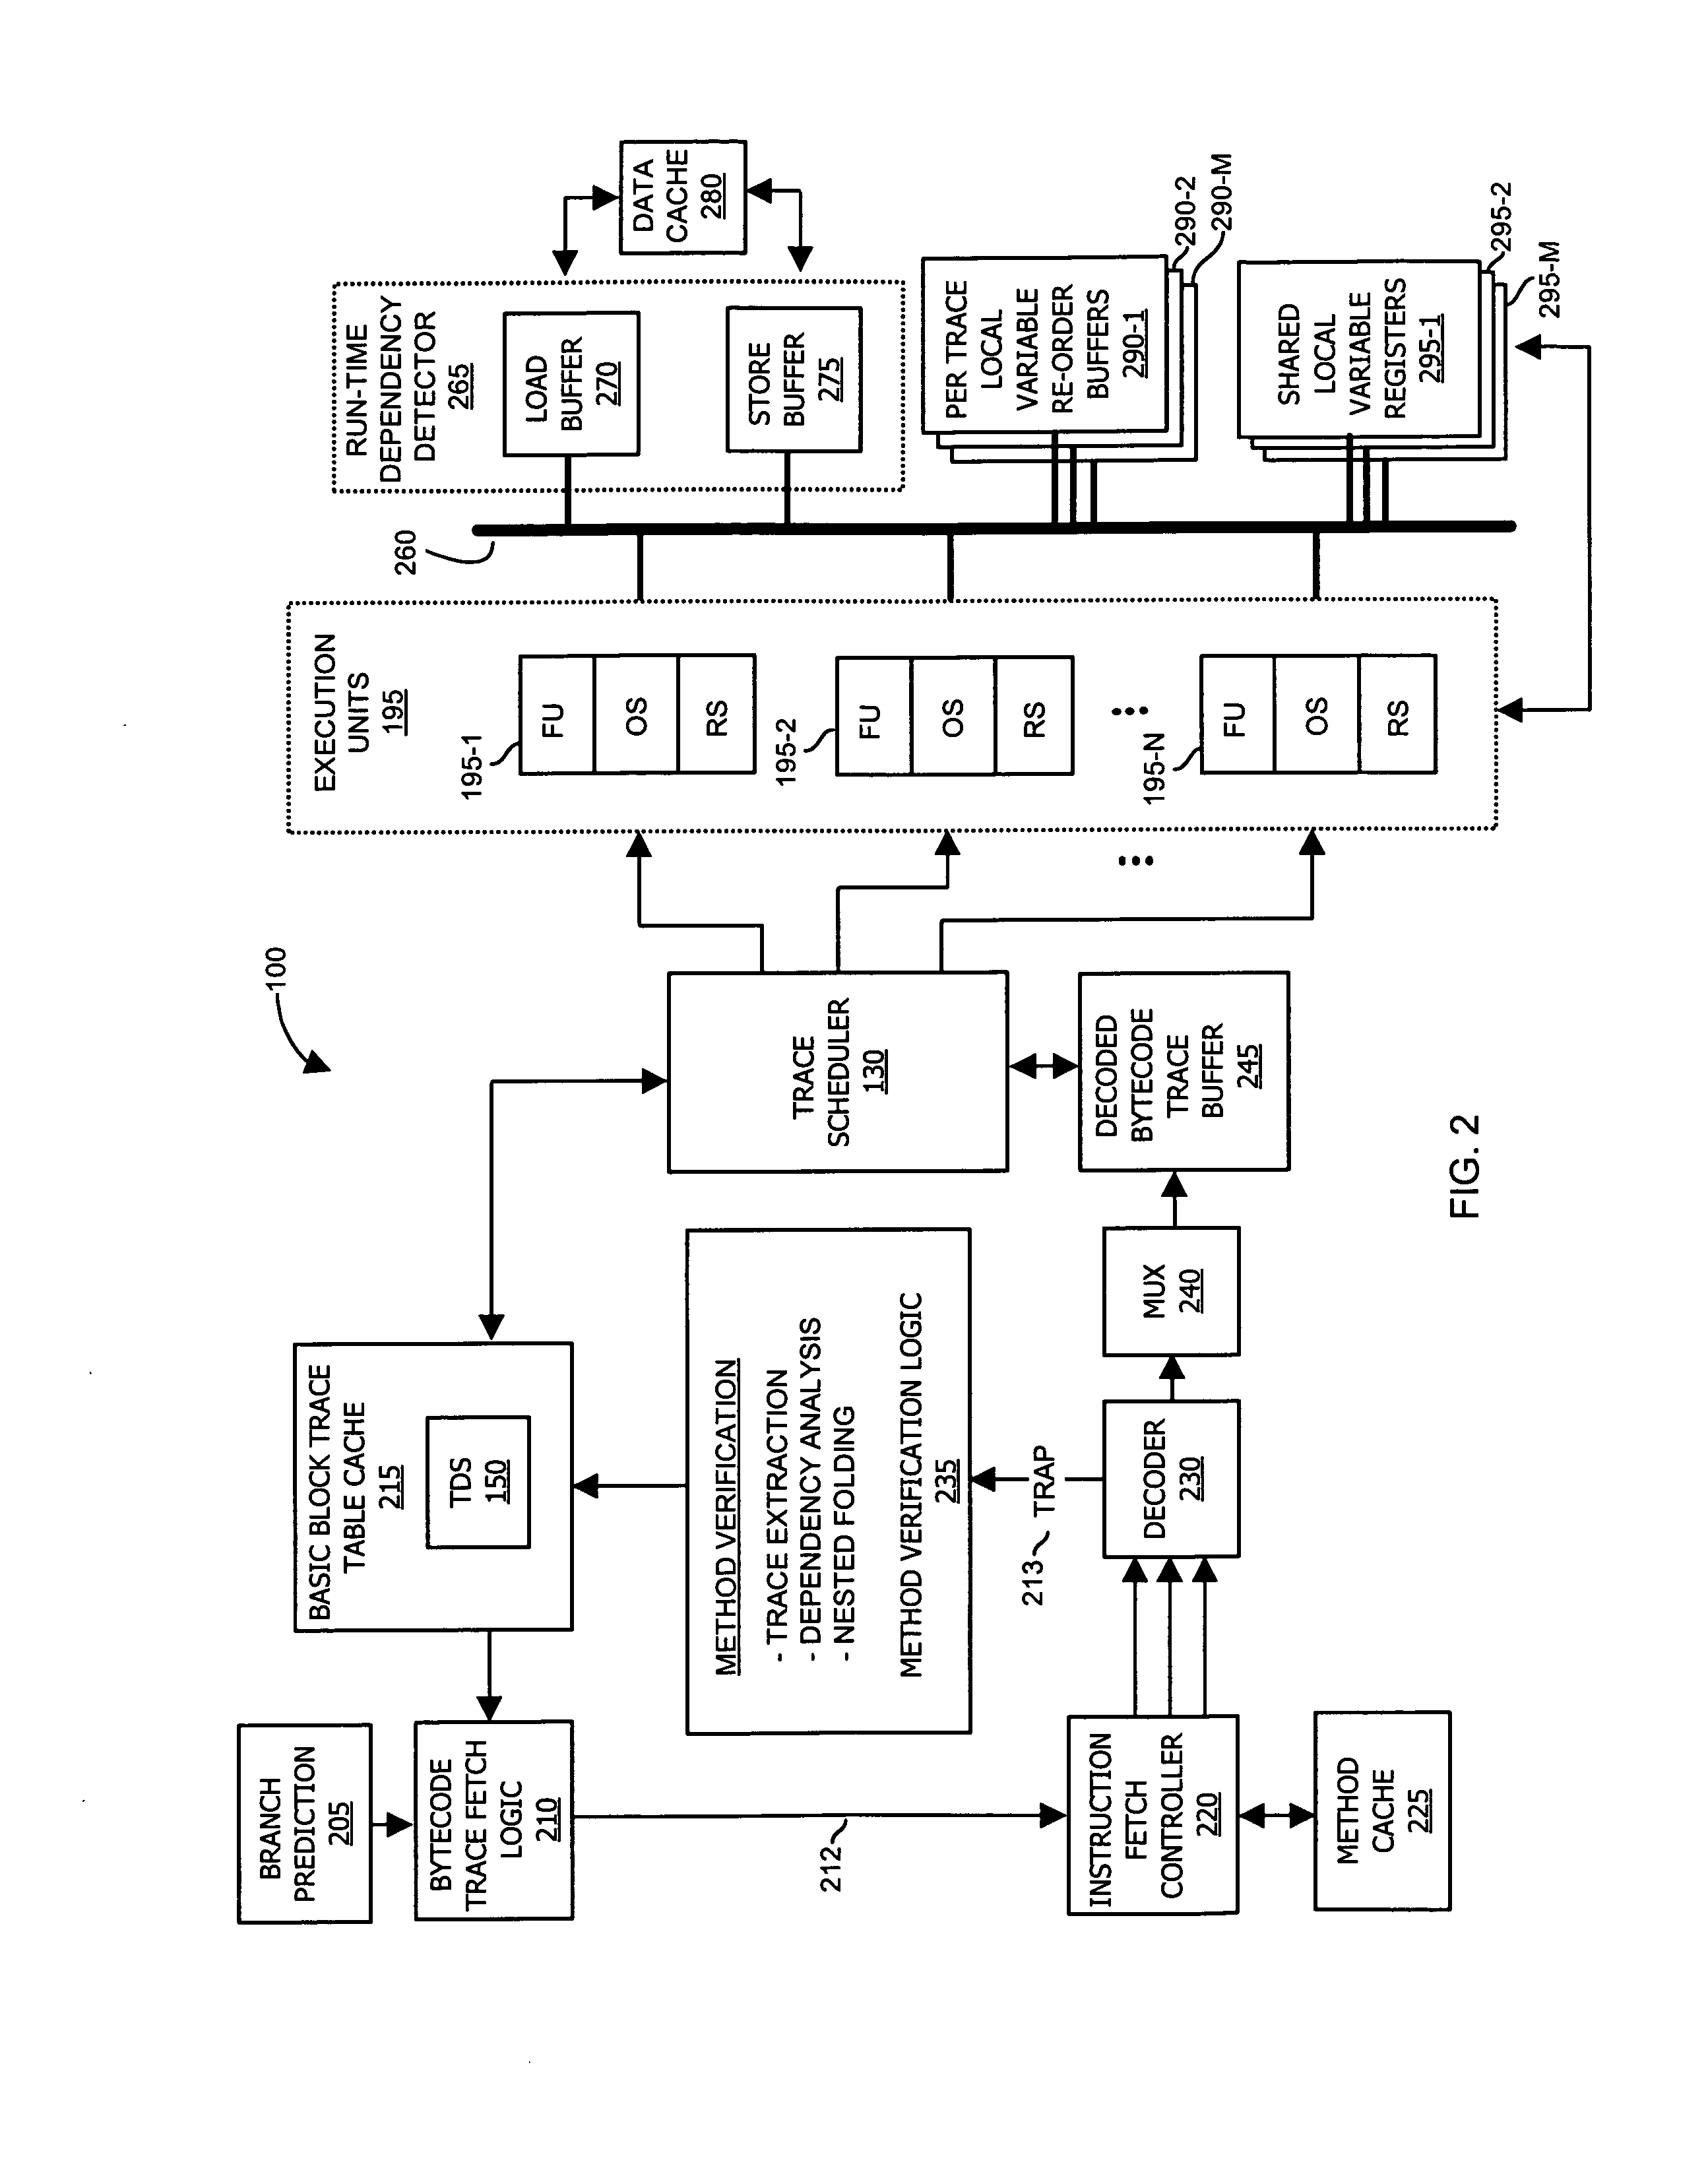 Methods and apparatus of an architecture supporting execution of instructions in parallel